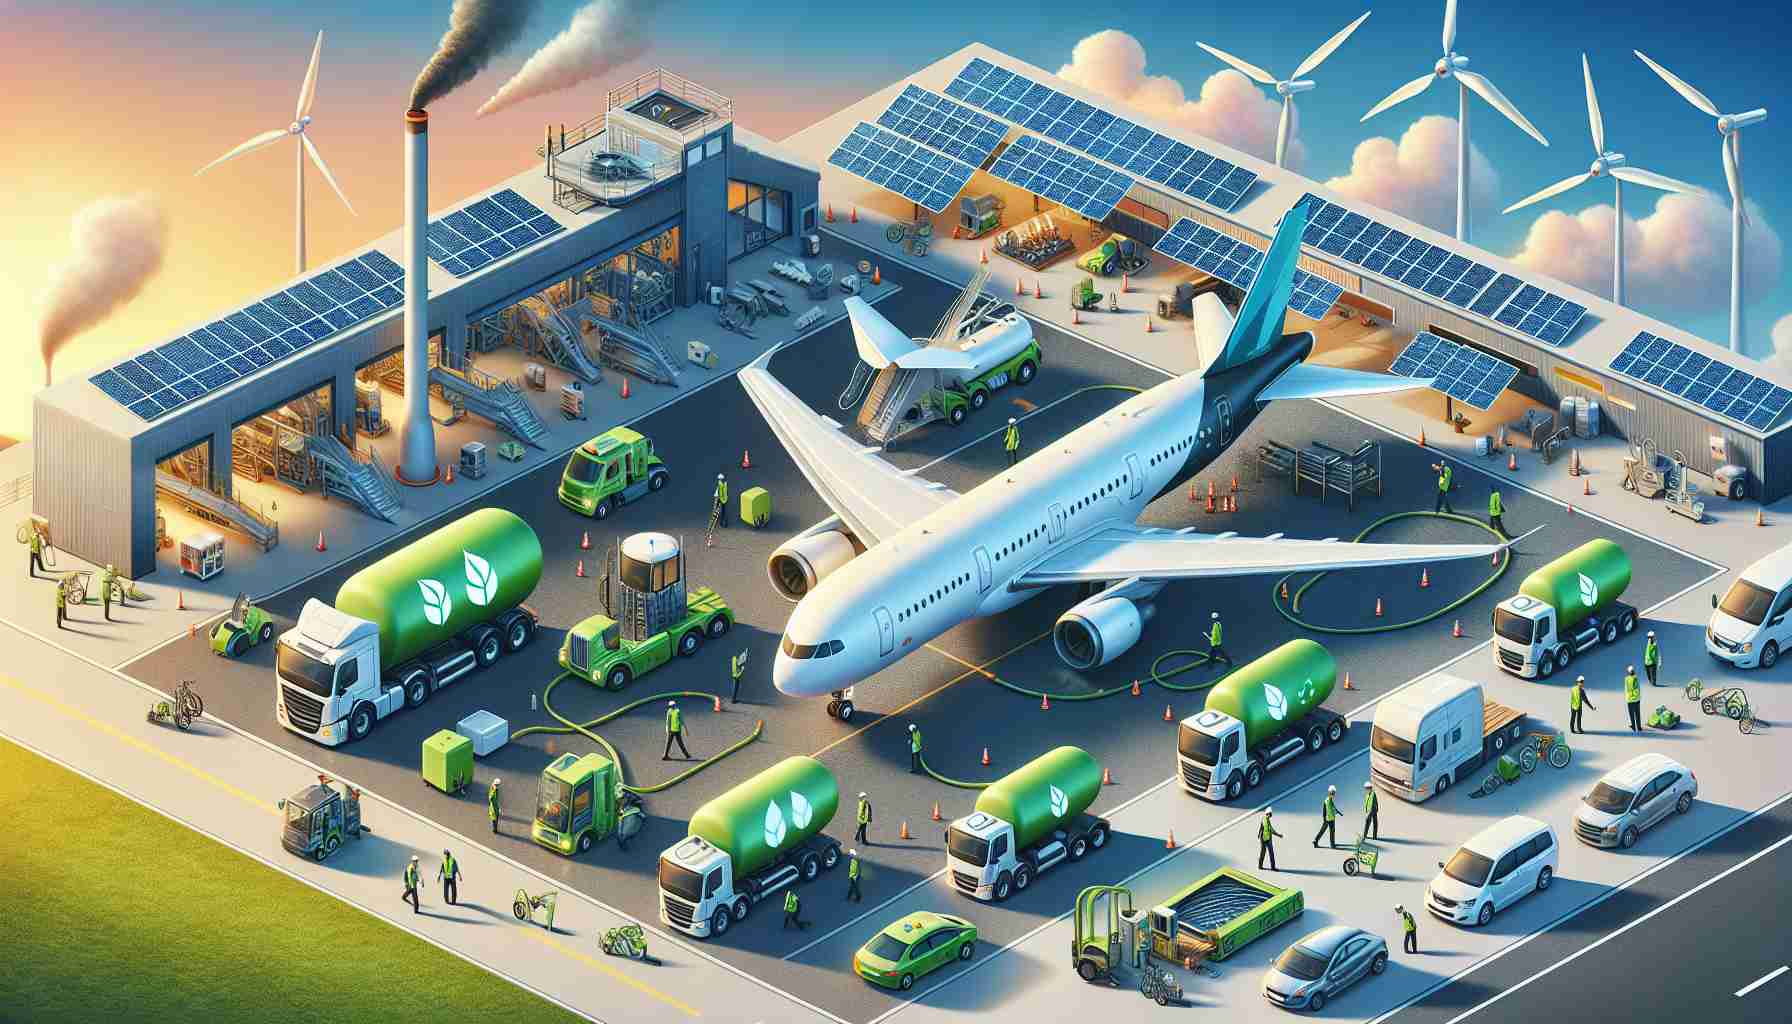 HD image of the new era of aviation focusing on reductions in carbon emissions. The scene includes newly innovated aircrafts with efficient engines emitting less smoke, fuel tanker trucks with green leaf symbols indicating eco-friendly fuel, engineers of varying descents and genders performing maintenance checks on the aircraft. Solar panels and wind turbines adorn the surroundings of the airport implying the use of renewable energy sources. All in a color-accurate, distinct, and ultra-realistic painting style.